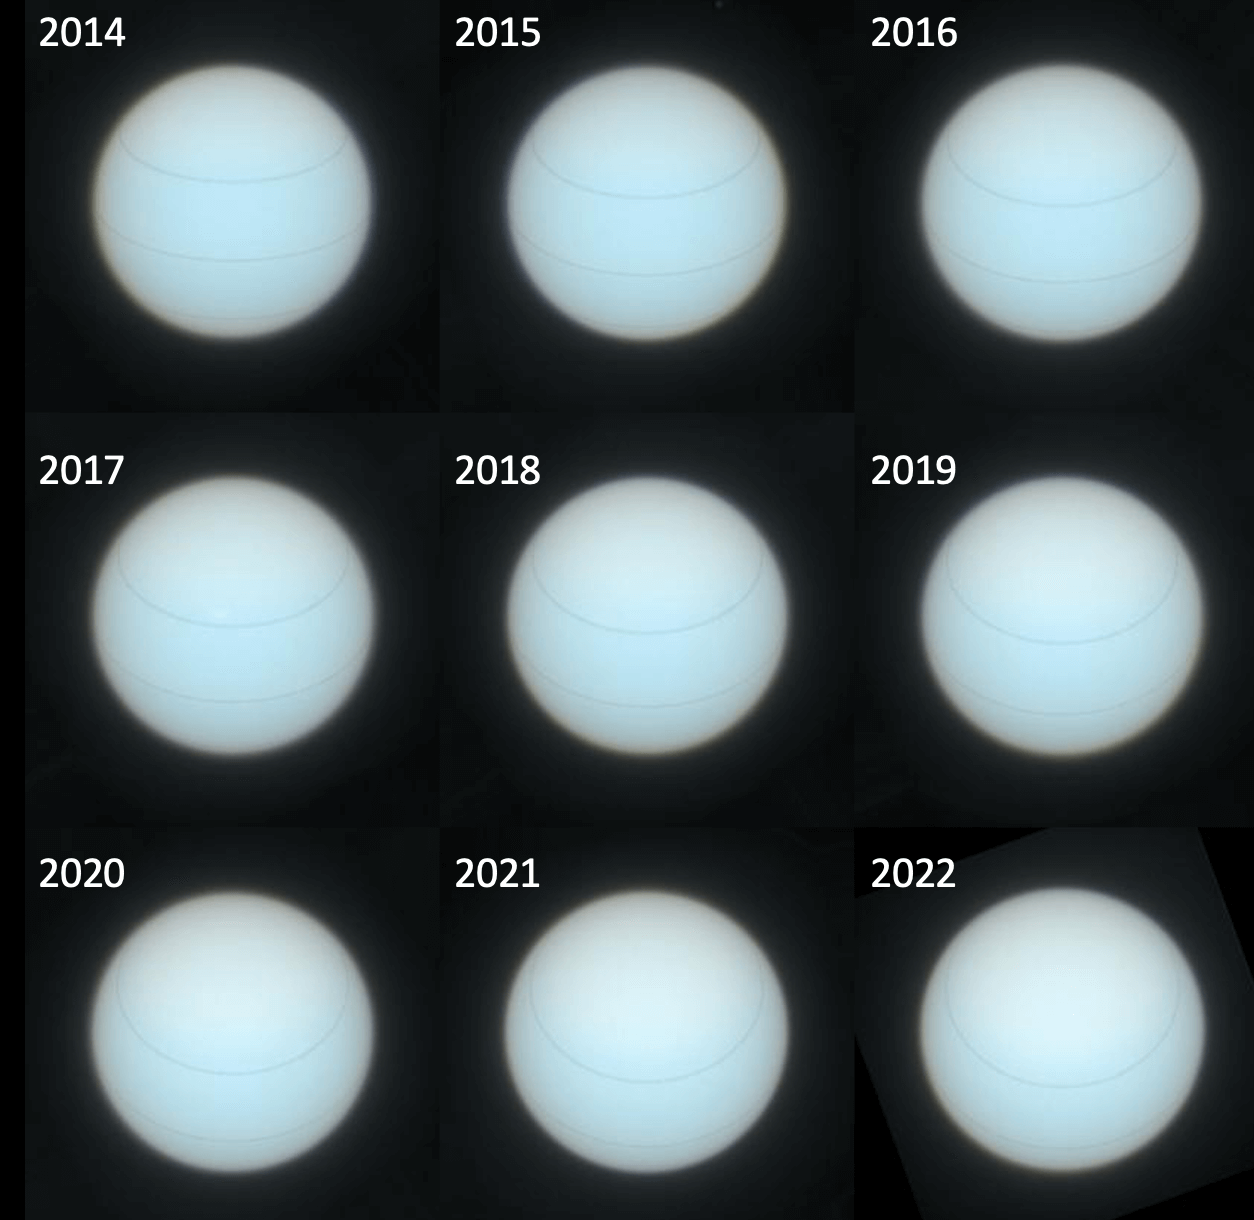 Uranus as seen by HST/WFC3 from 2015-2022. 